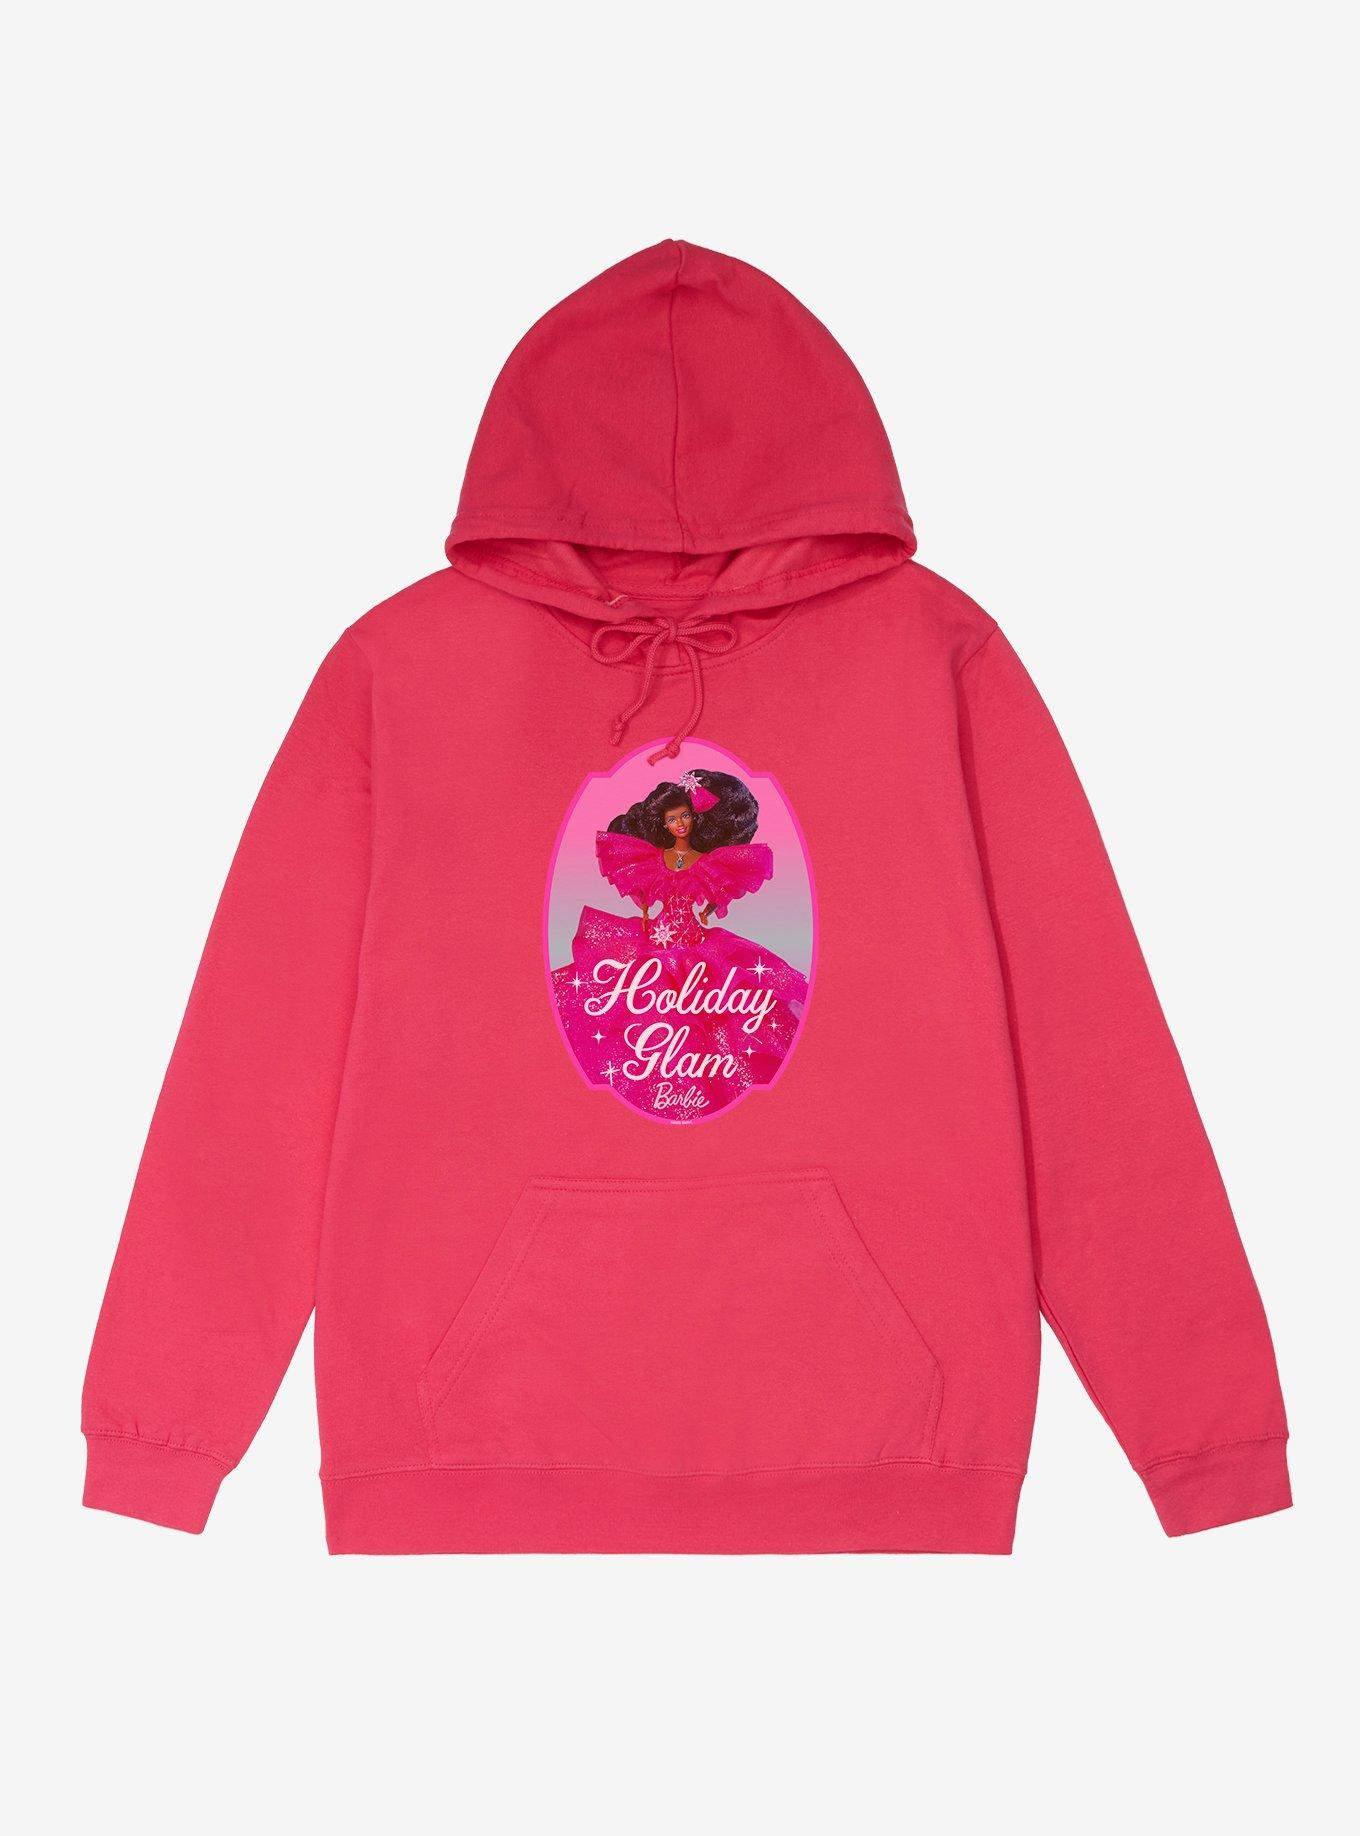 Barbie Holiday Glam French Terry Hoodie